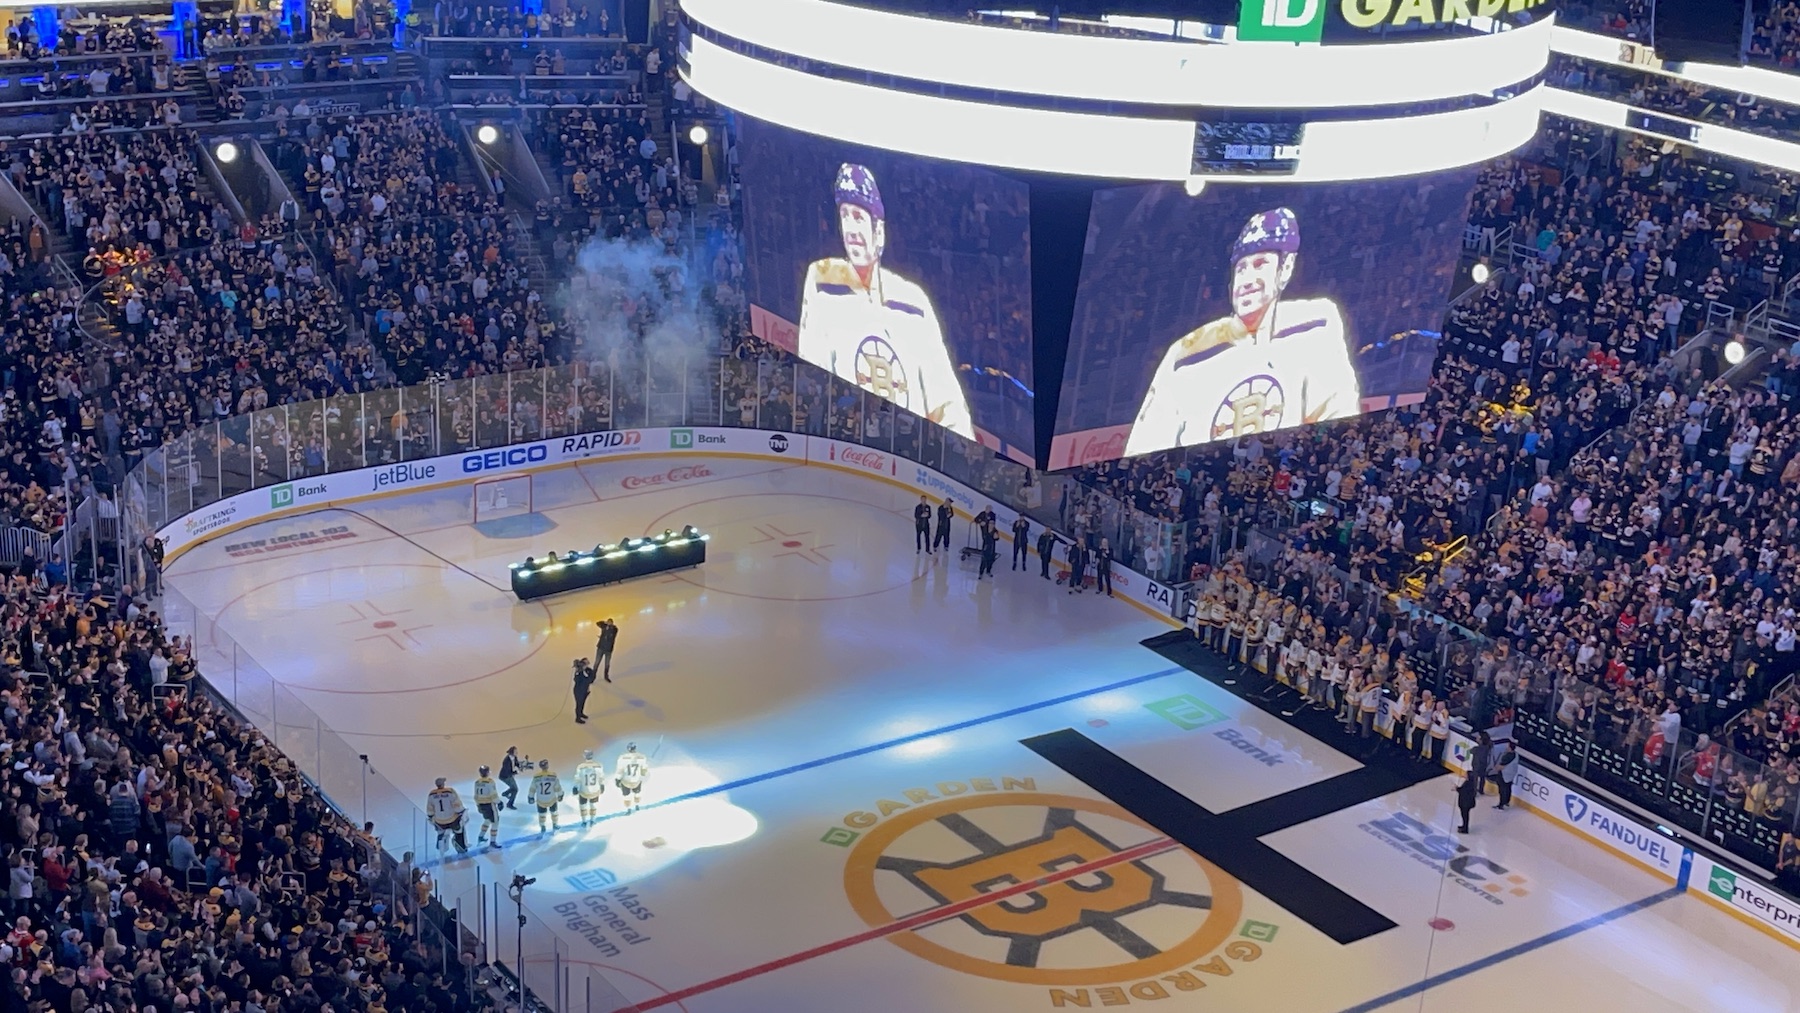 Boston Bruins - Bruins legend Terry O'Reilly joined fellow